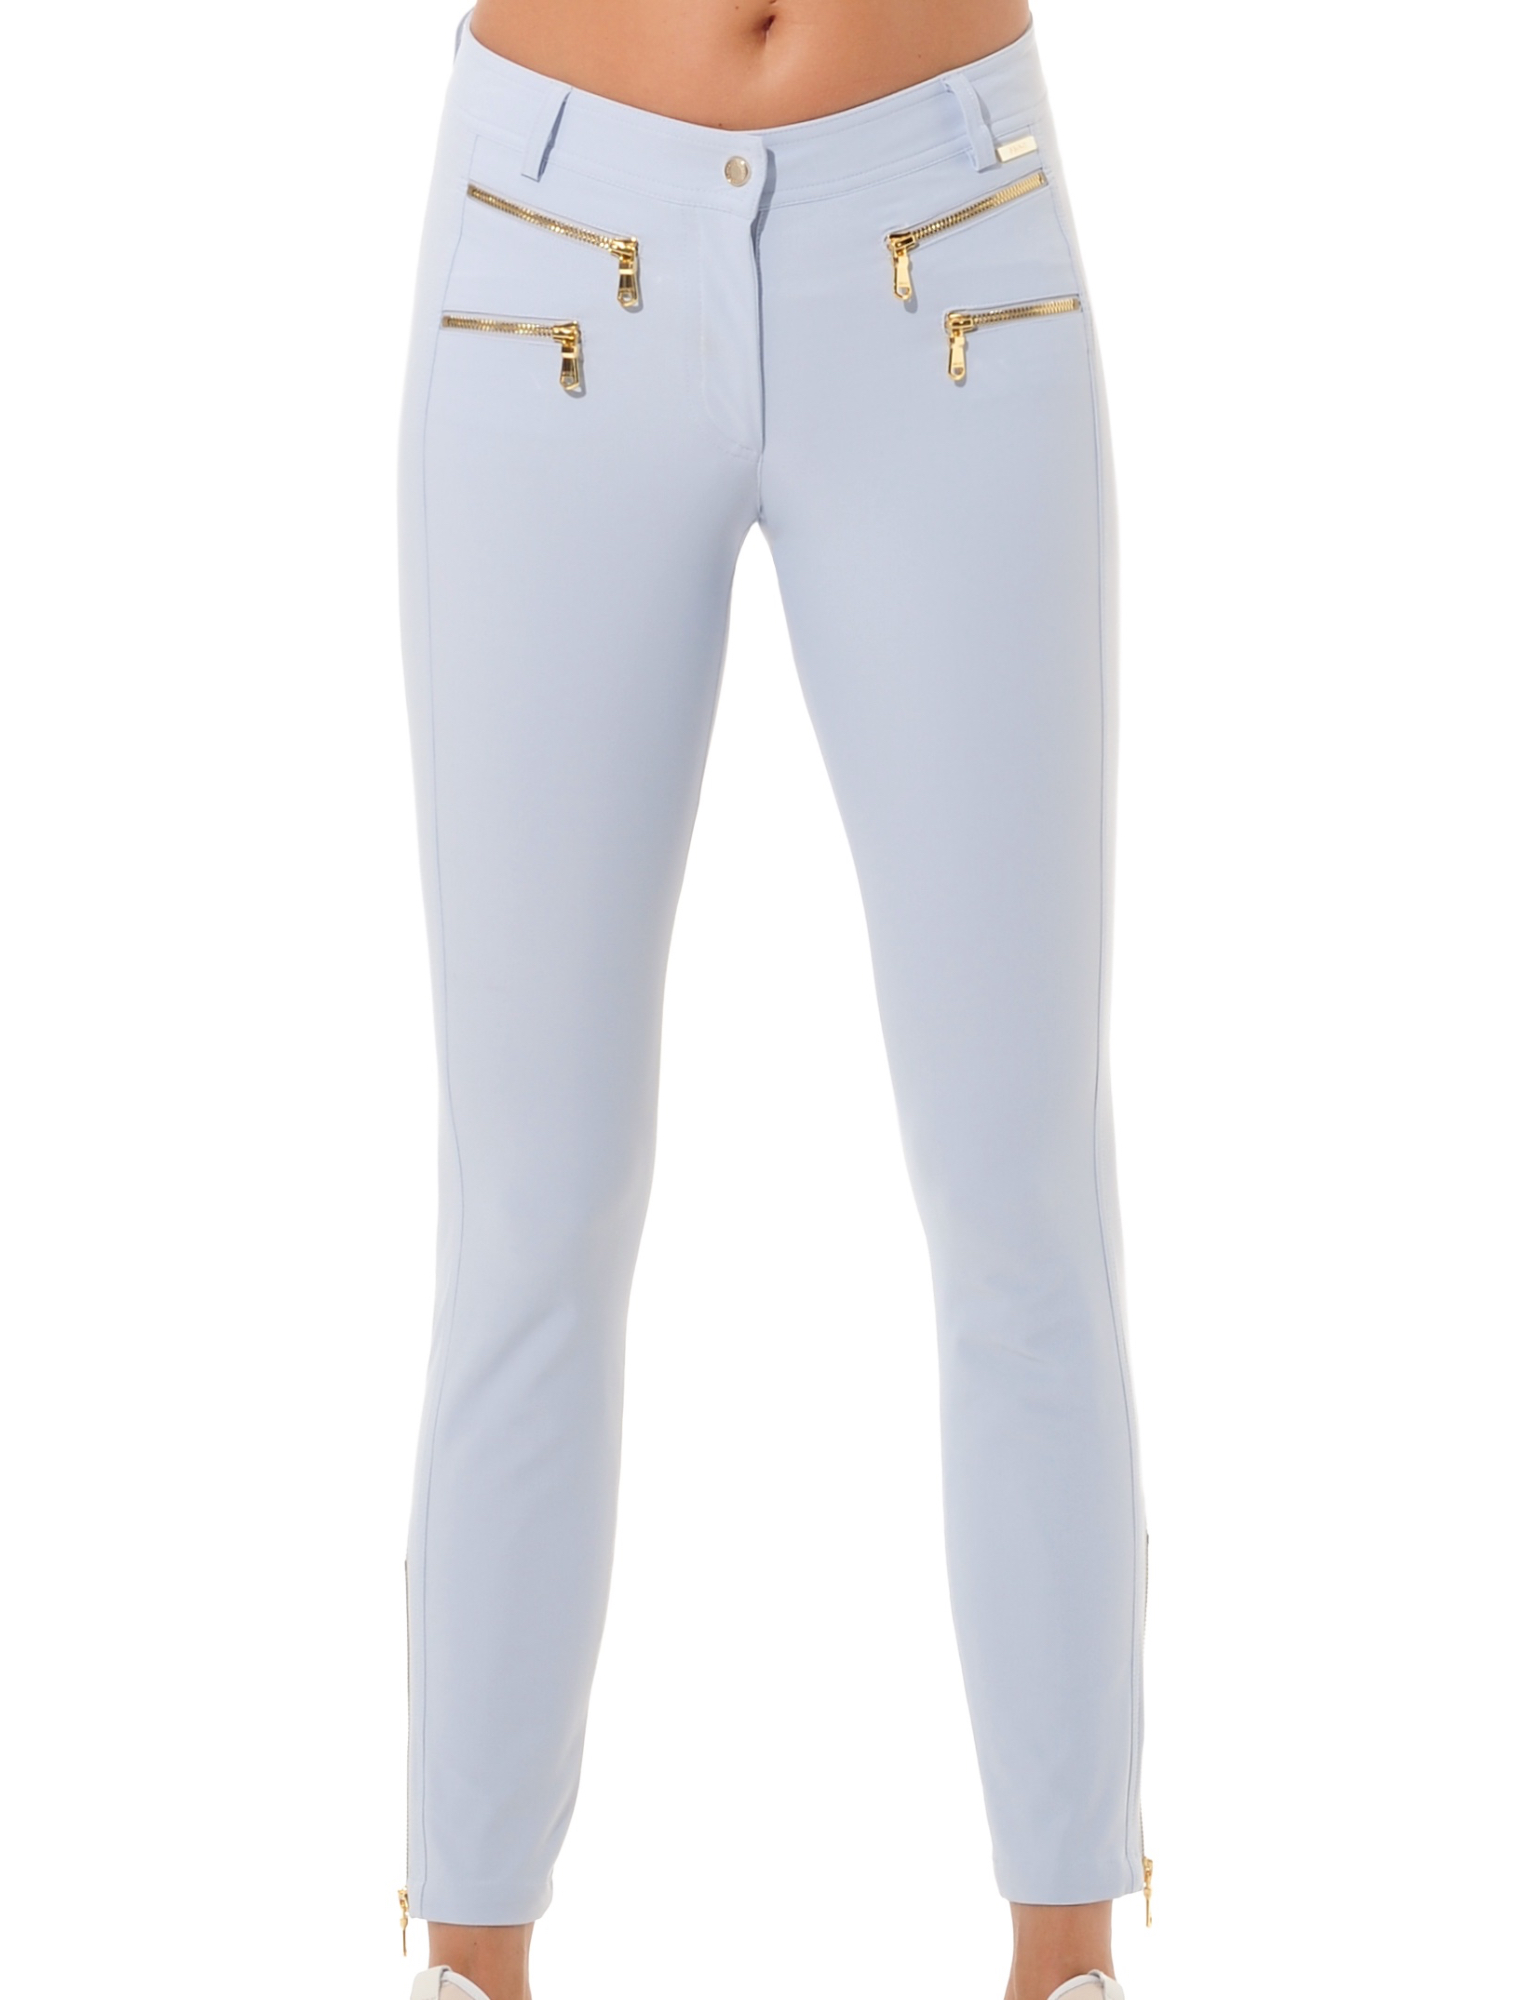 4way stretch shiny gold double zip ankle pants cloud 